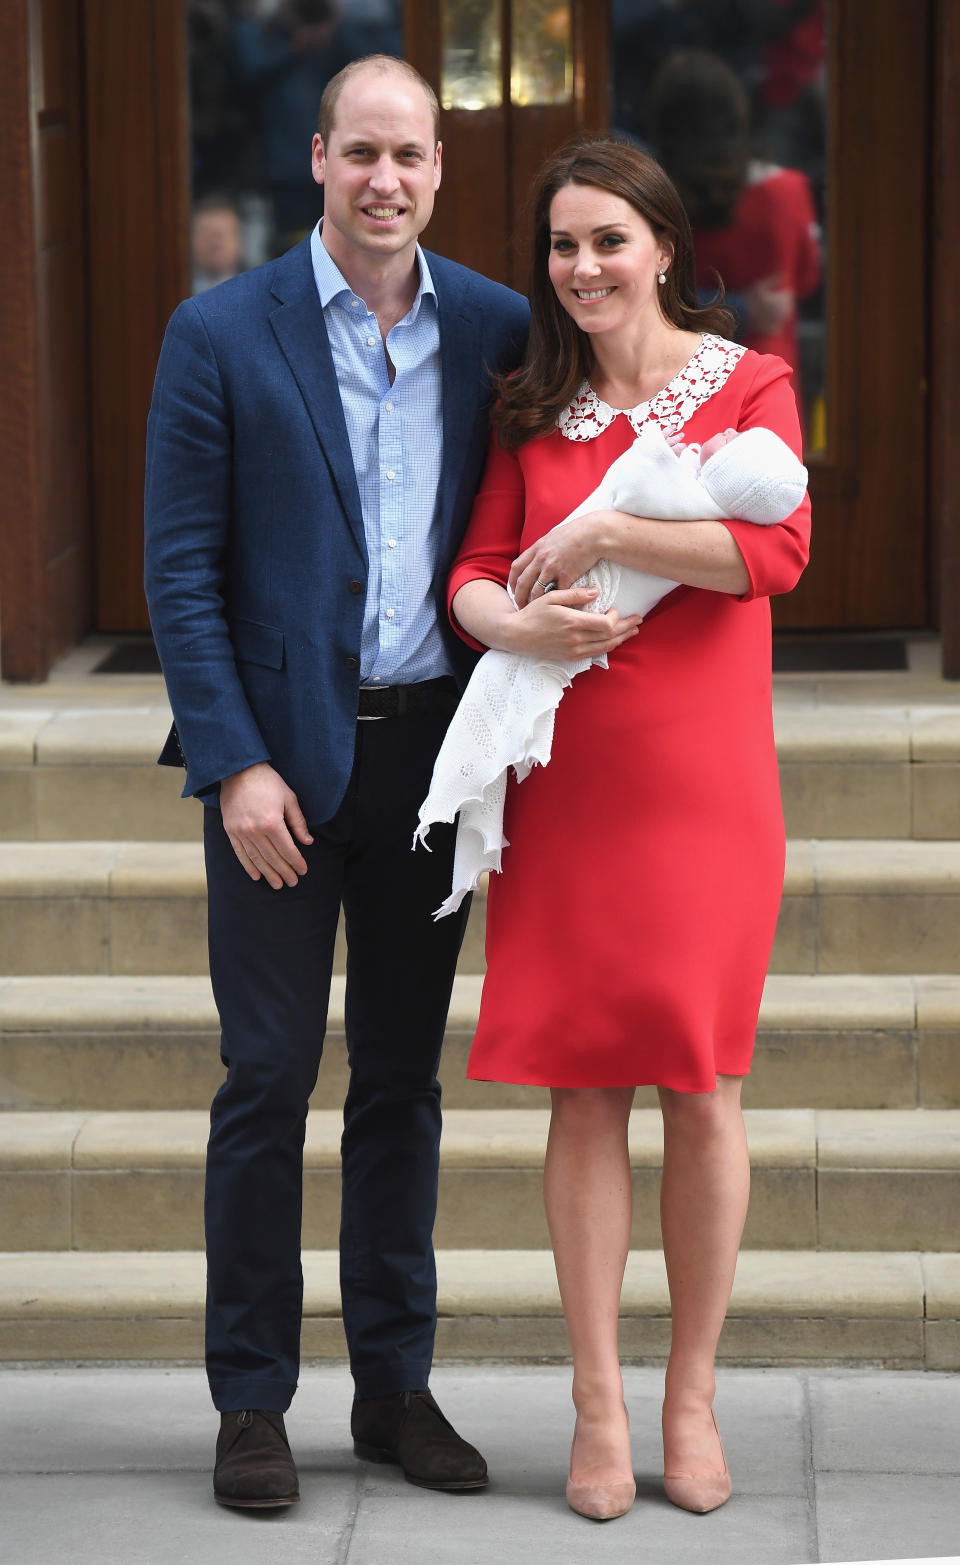 The Duke and Duchess of Cambridge photographed outside the Lindo Wing with their third child, Prince Louis, on 23 April 2018. (Getty Images) 